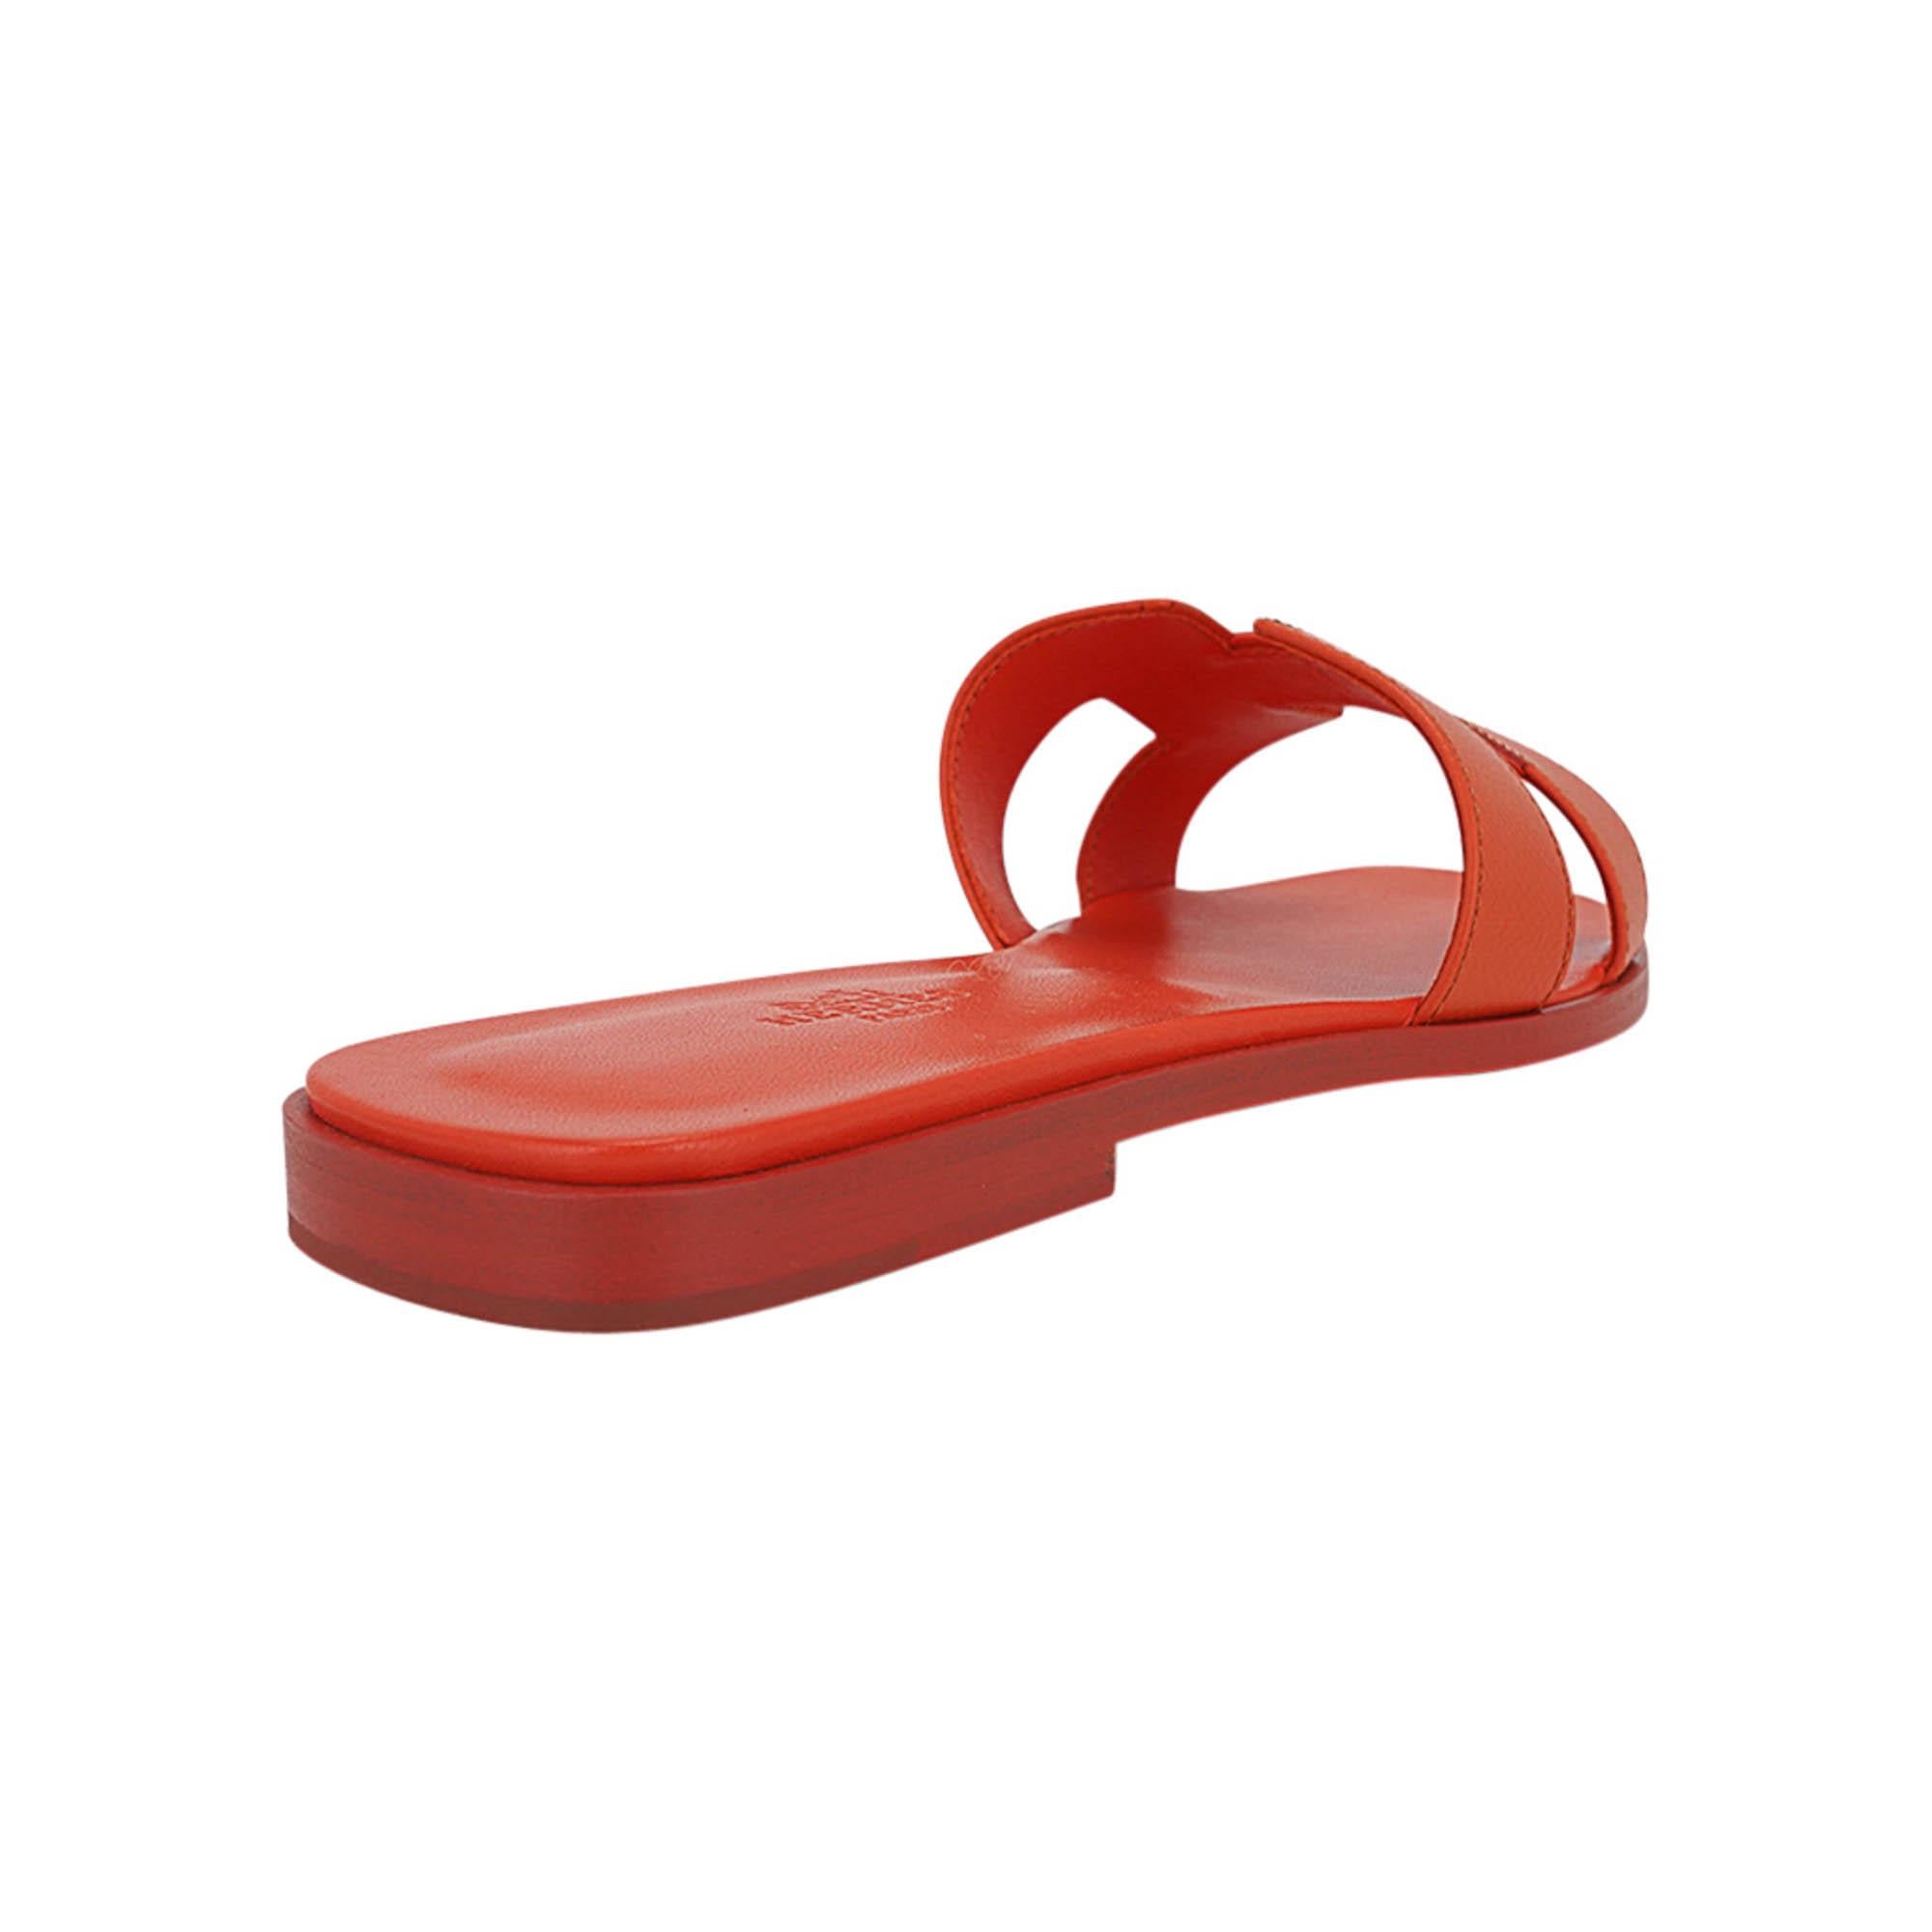 Hermes Orange Oran Sandal Epsom Leather Flat Shoes 40 In New Condition For Sale In Miami, FL